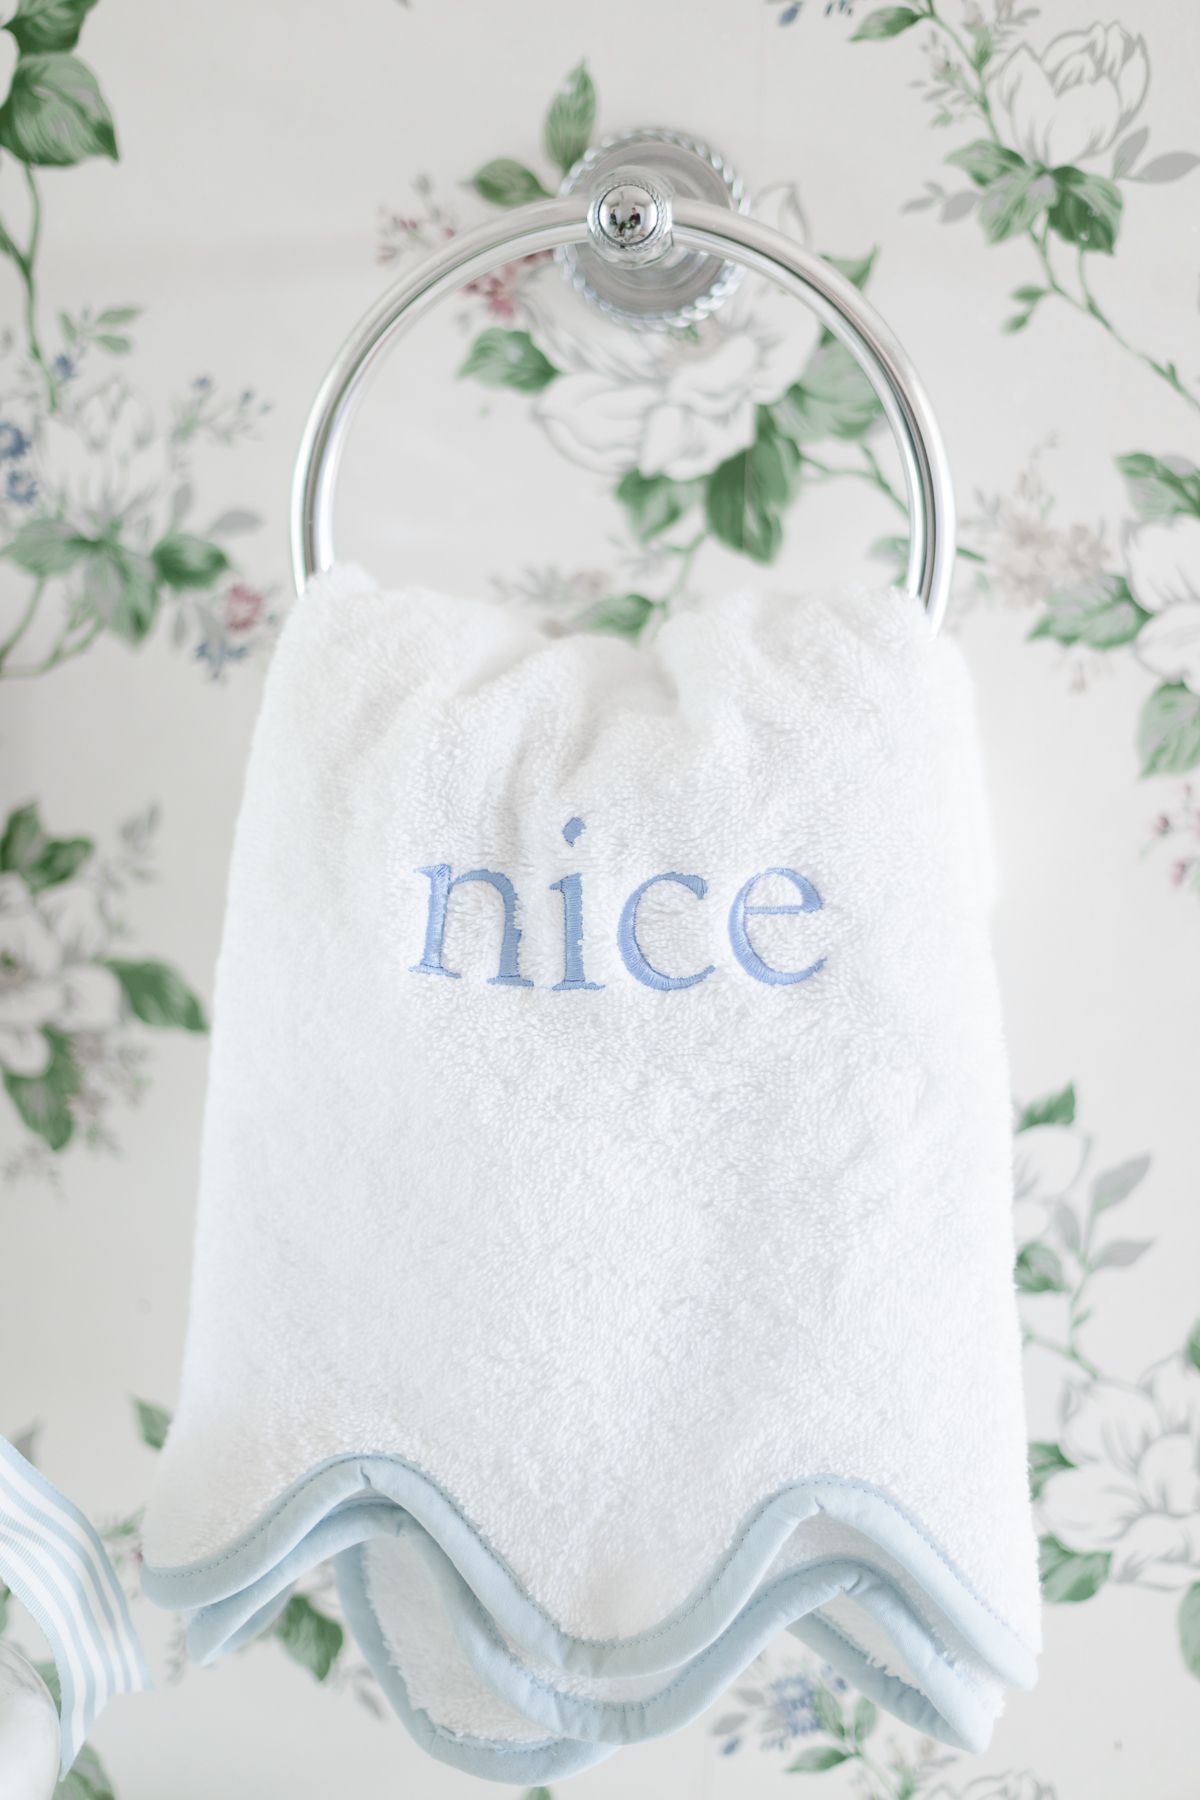 A blue and white towel that is embroidered with the word "nice" in a floral wallpapered bathroom.